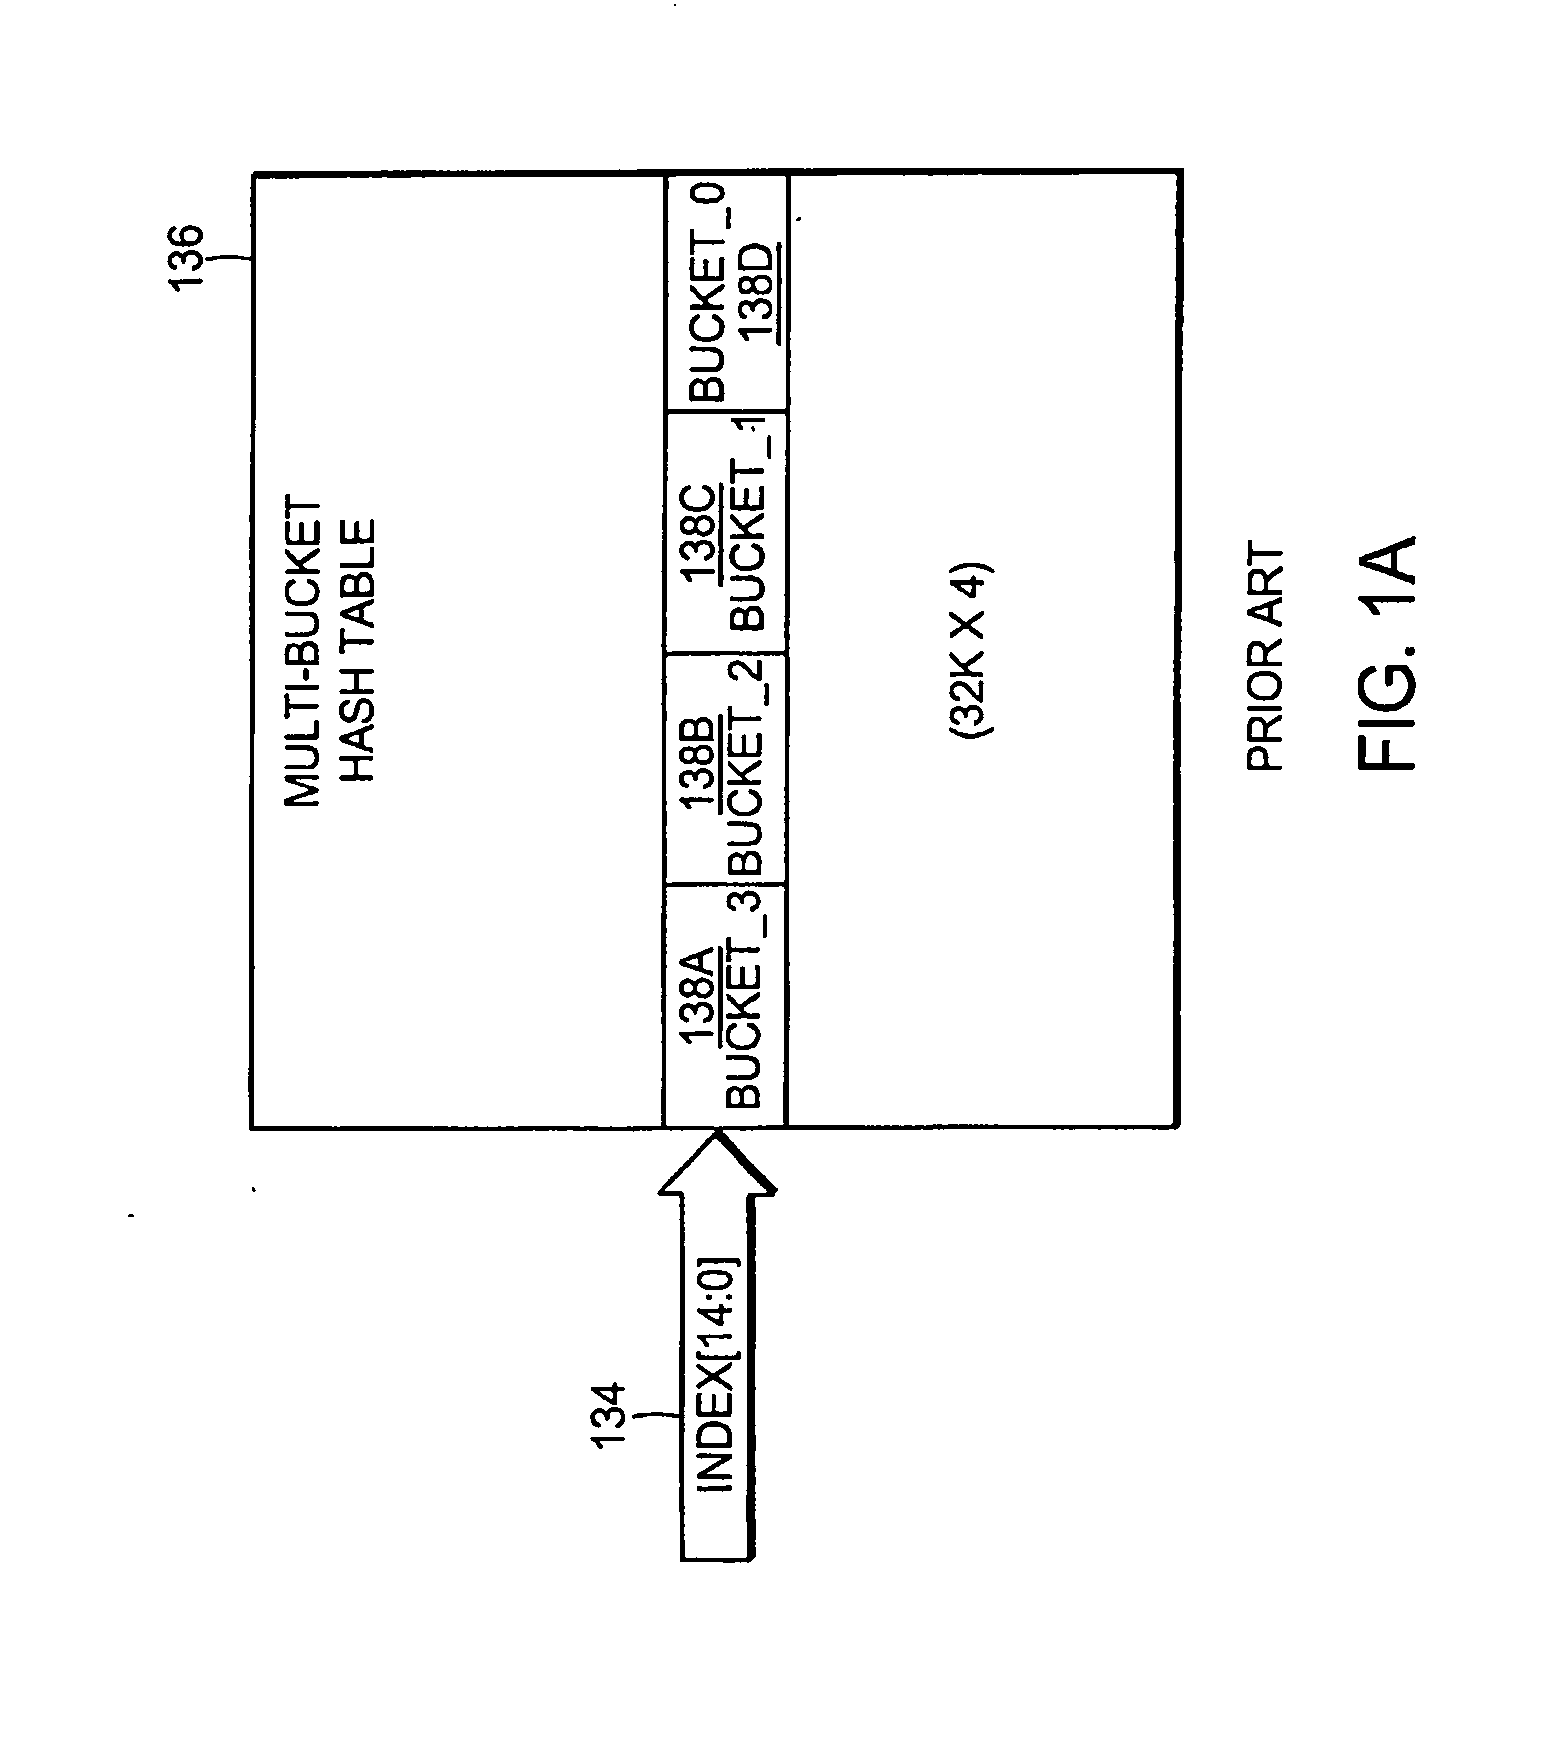 Congestion level management in a network device